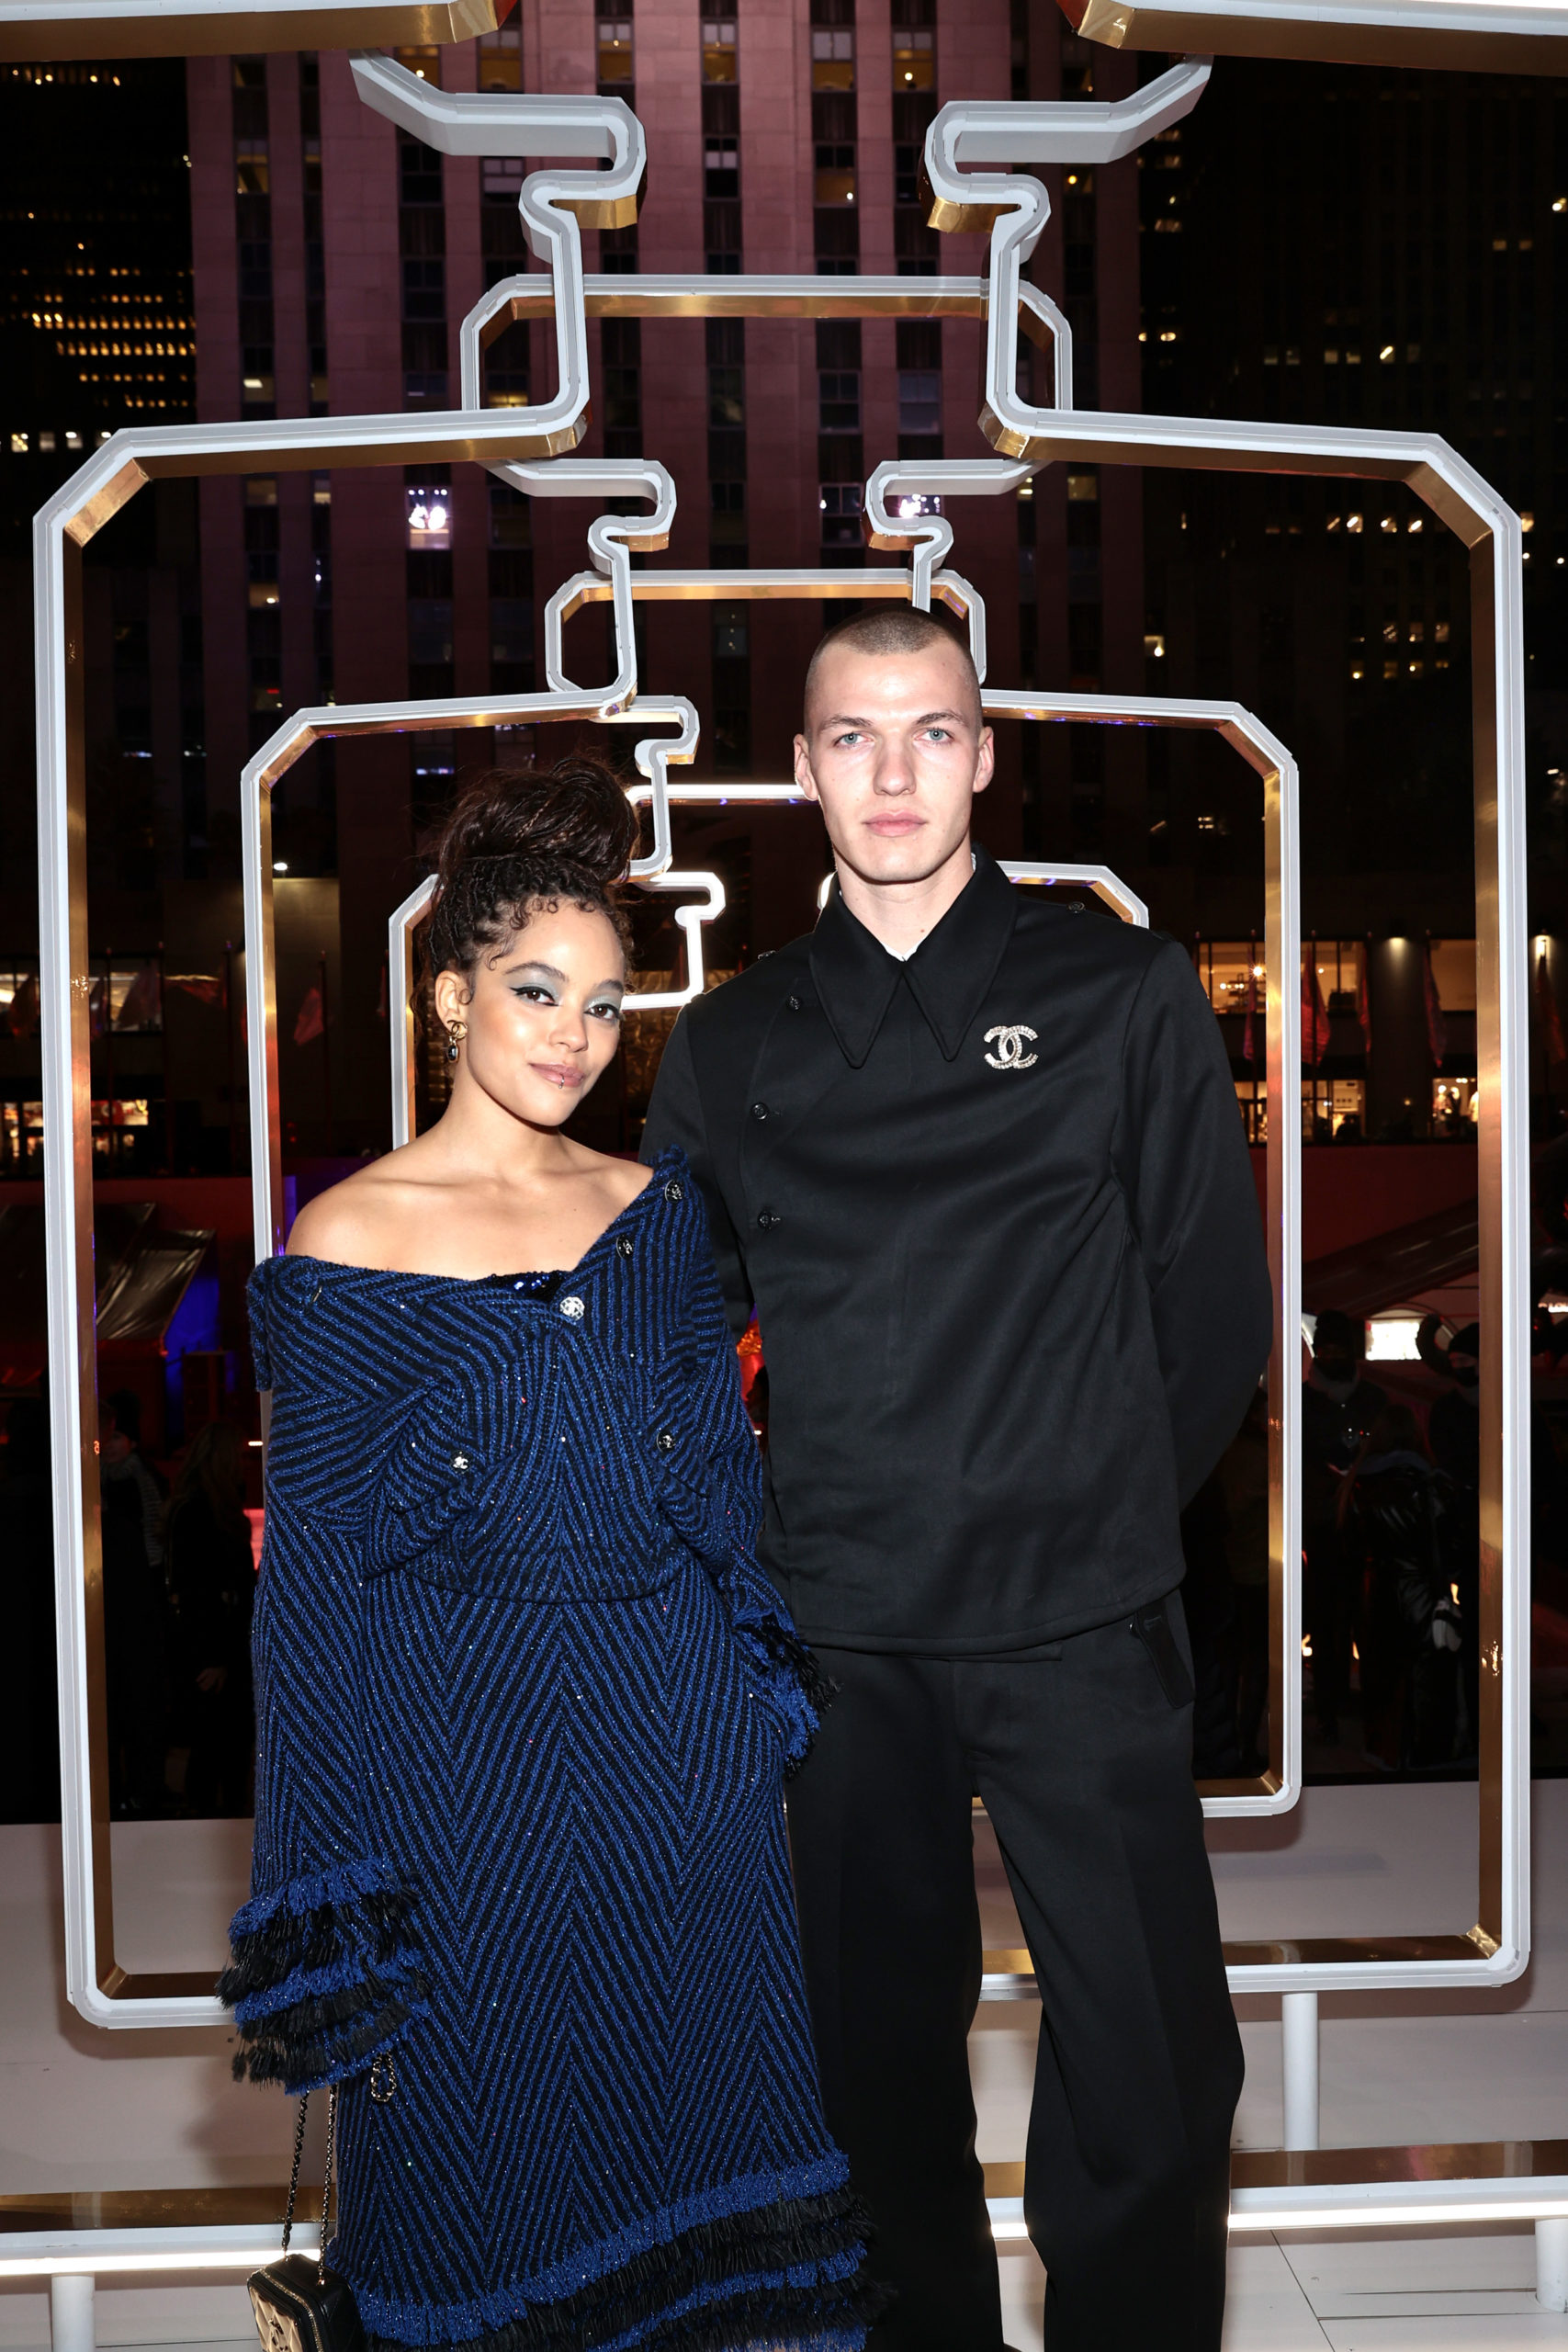  NEW YORK, NEW YORK - NOVEMBER 05: Quintessa Swindell and Jacob Hetzer attend the CHANEL Party wearing CHANEL to celebrate the debut of CHANEL N°5 in the Stars at Rockefeller Center on November 05, 2021 in New York City. (Photo by Dimitrios Kambouris/WireImage )